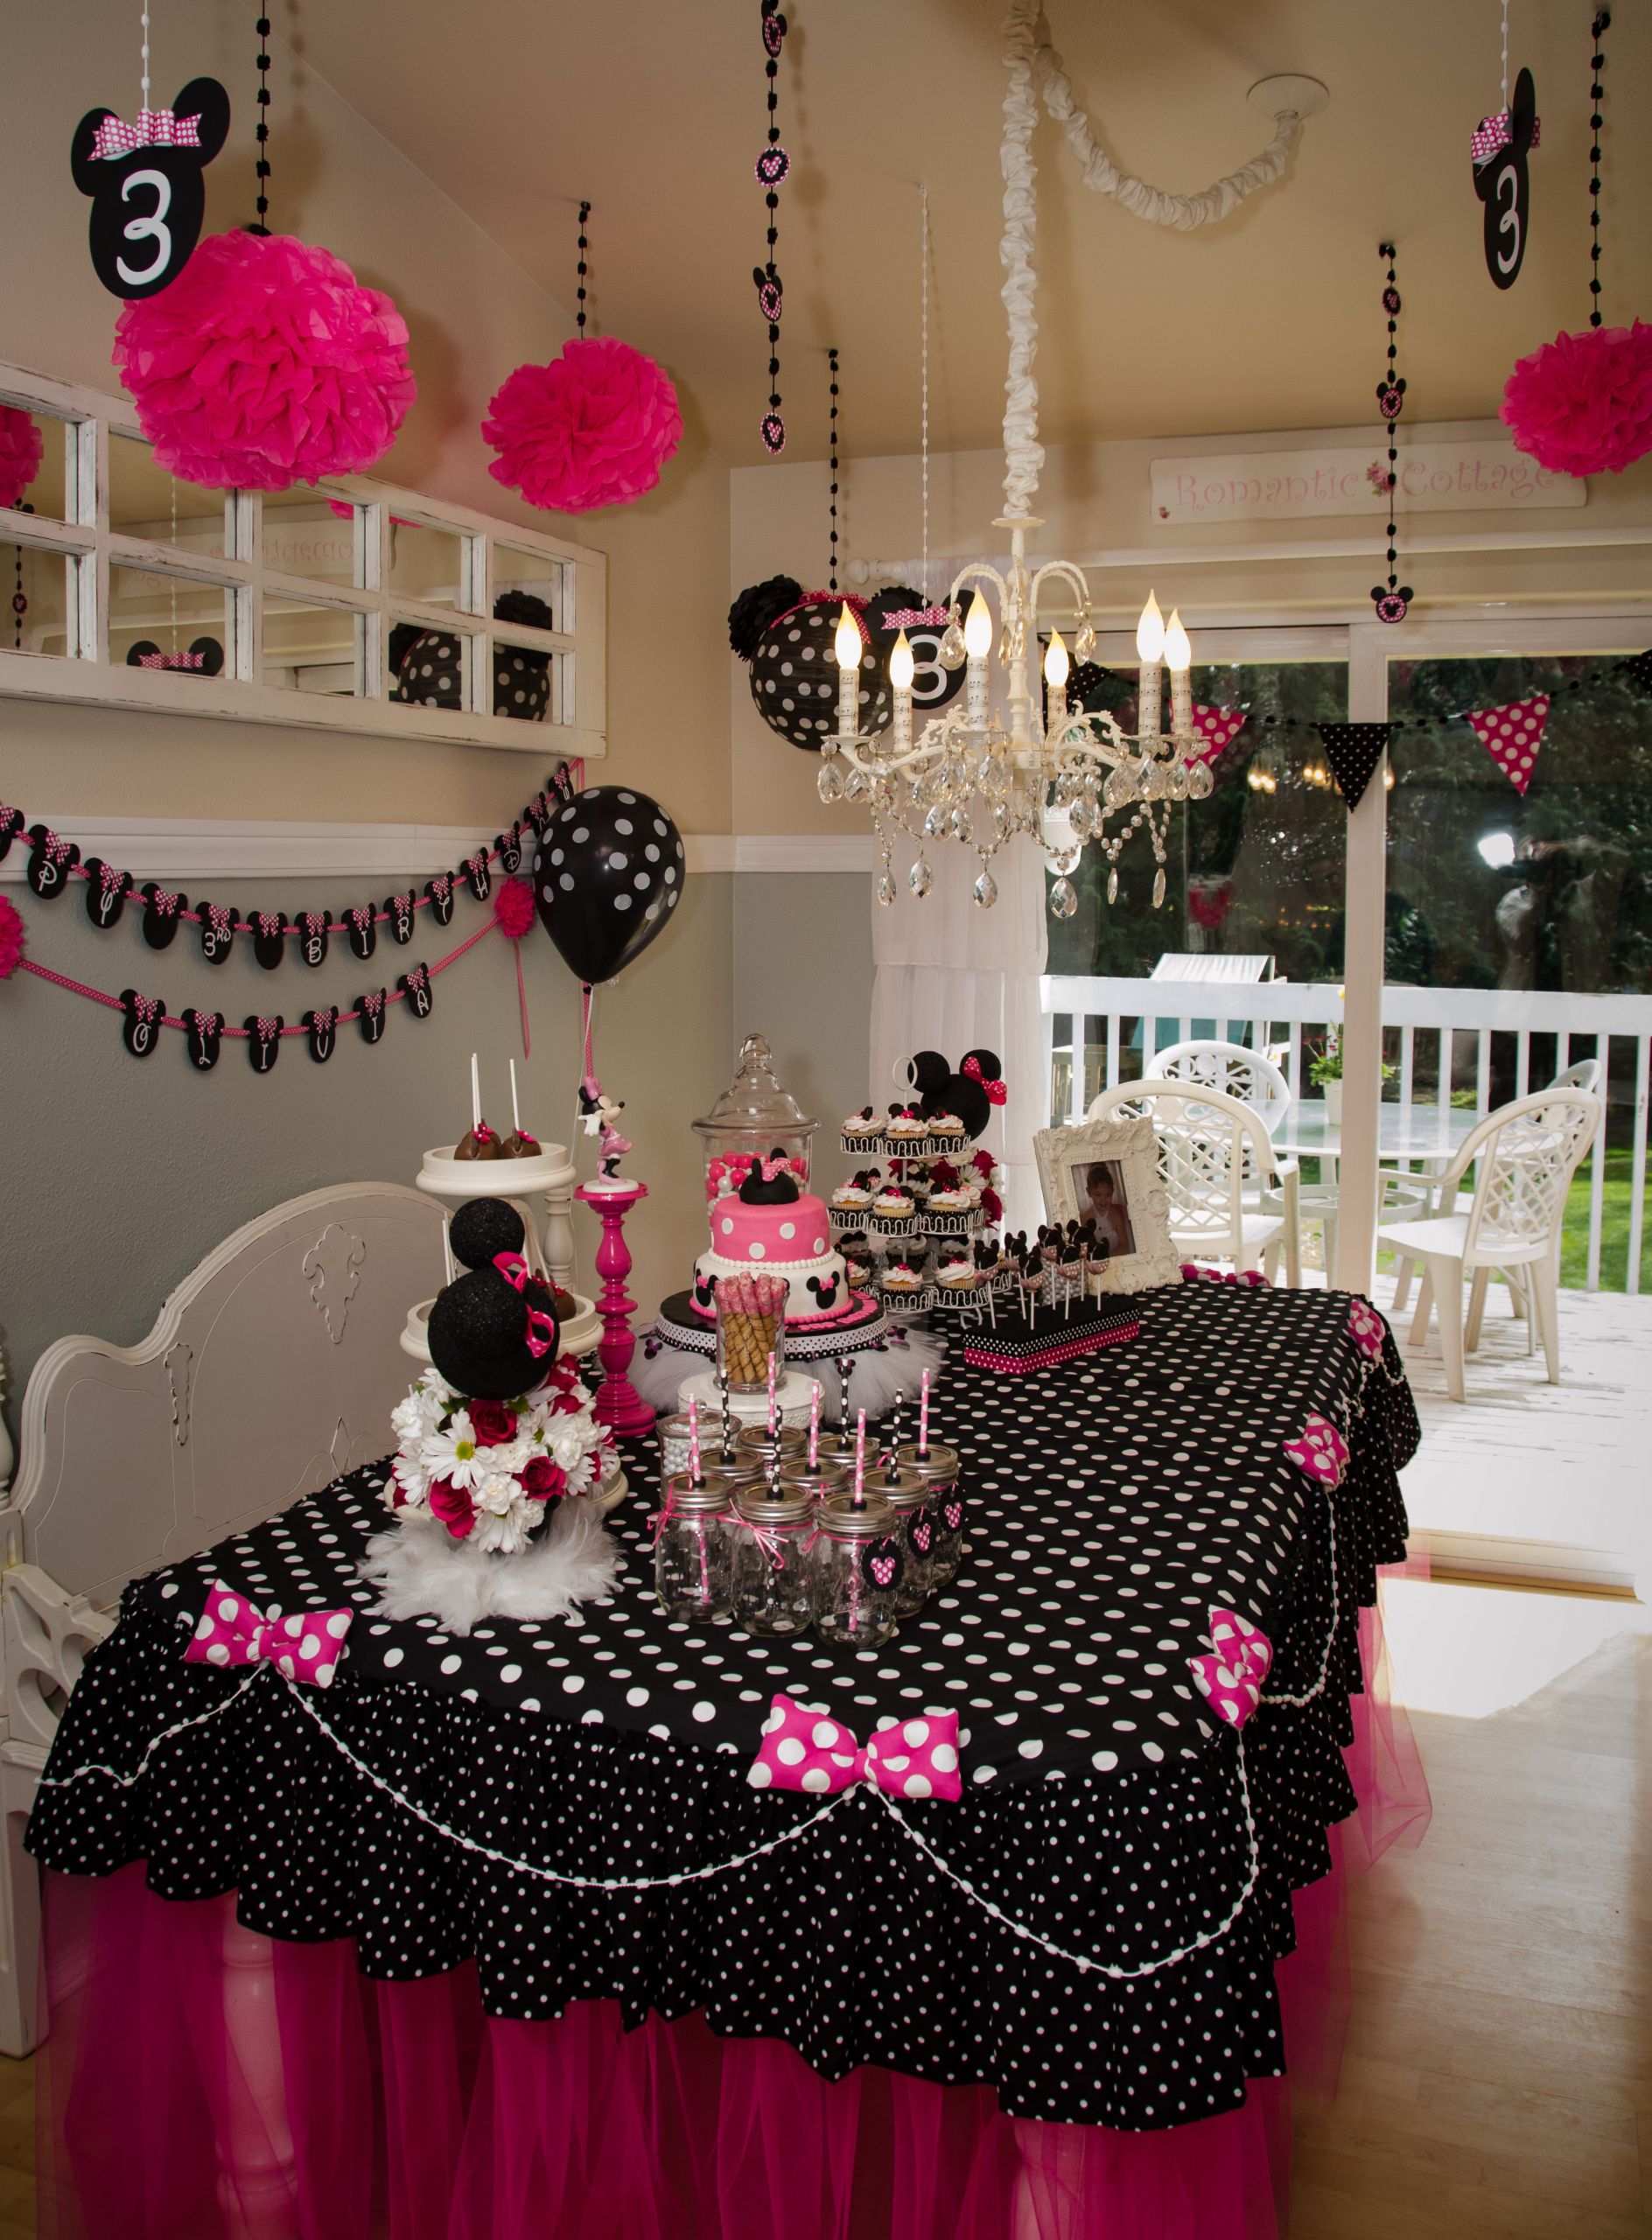 Minnie Mouse Birthday Decorations Red
 Minnie Mouse 3rd Birthday Party